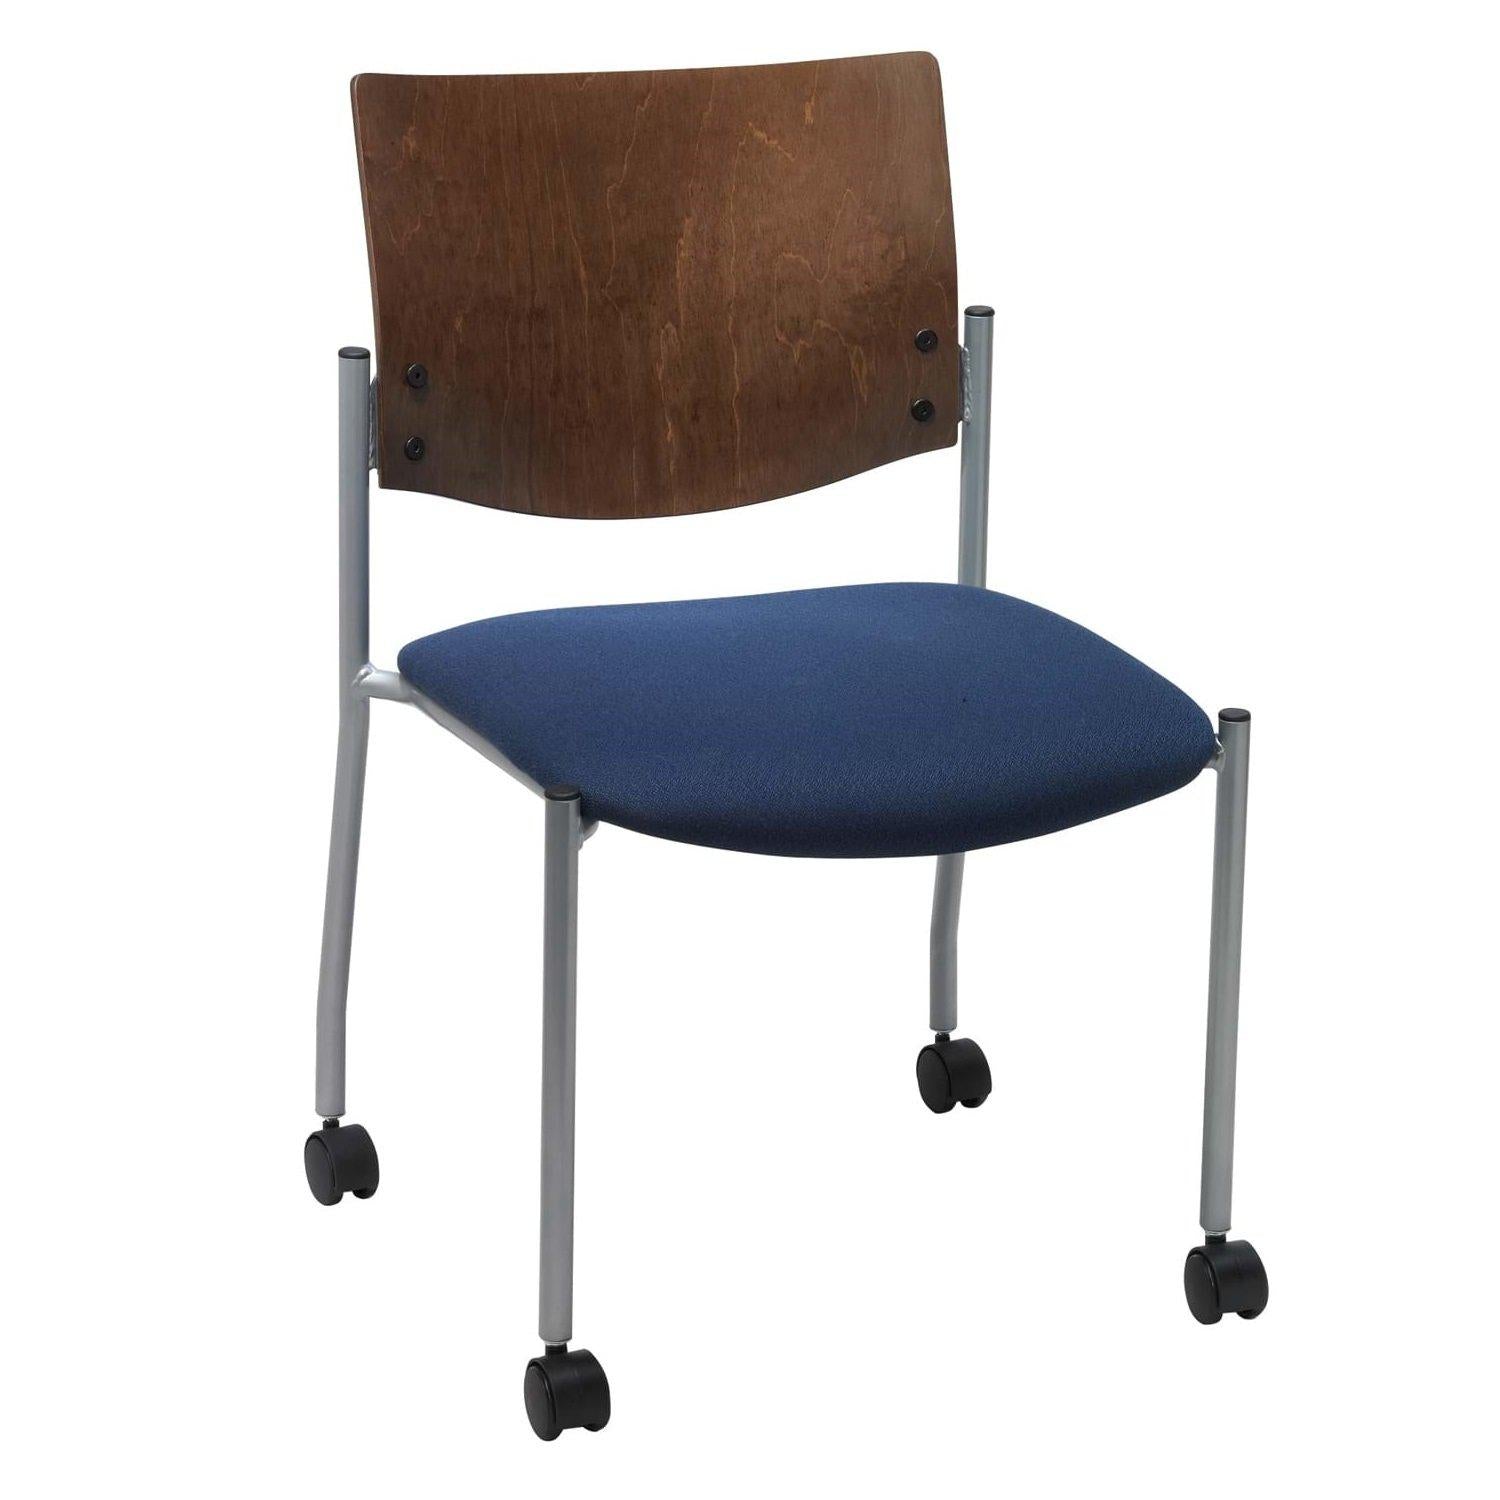 Evolve Chair with Casters, Wood Back, Padded Seat with Fabric Upholstery